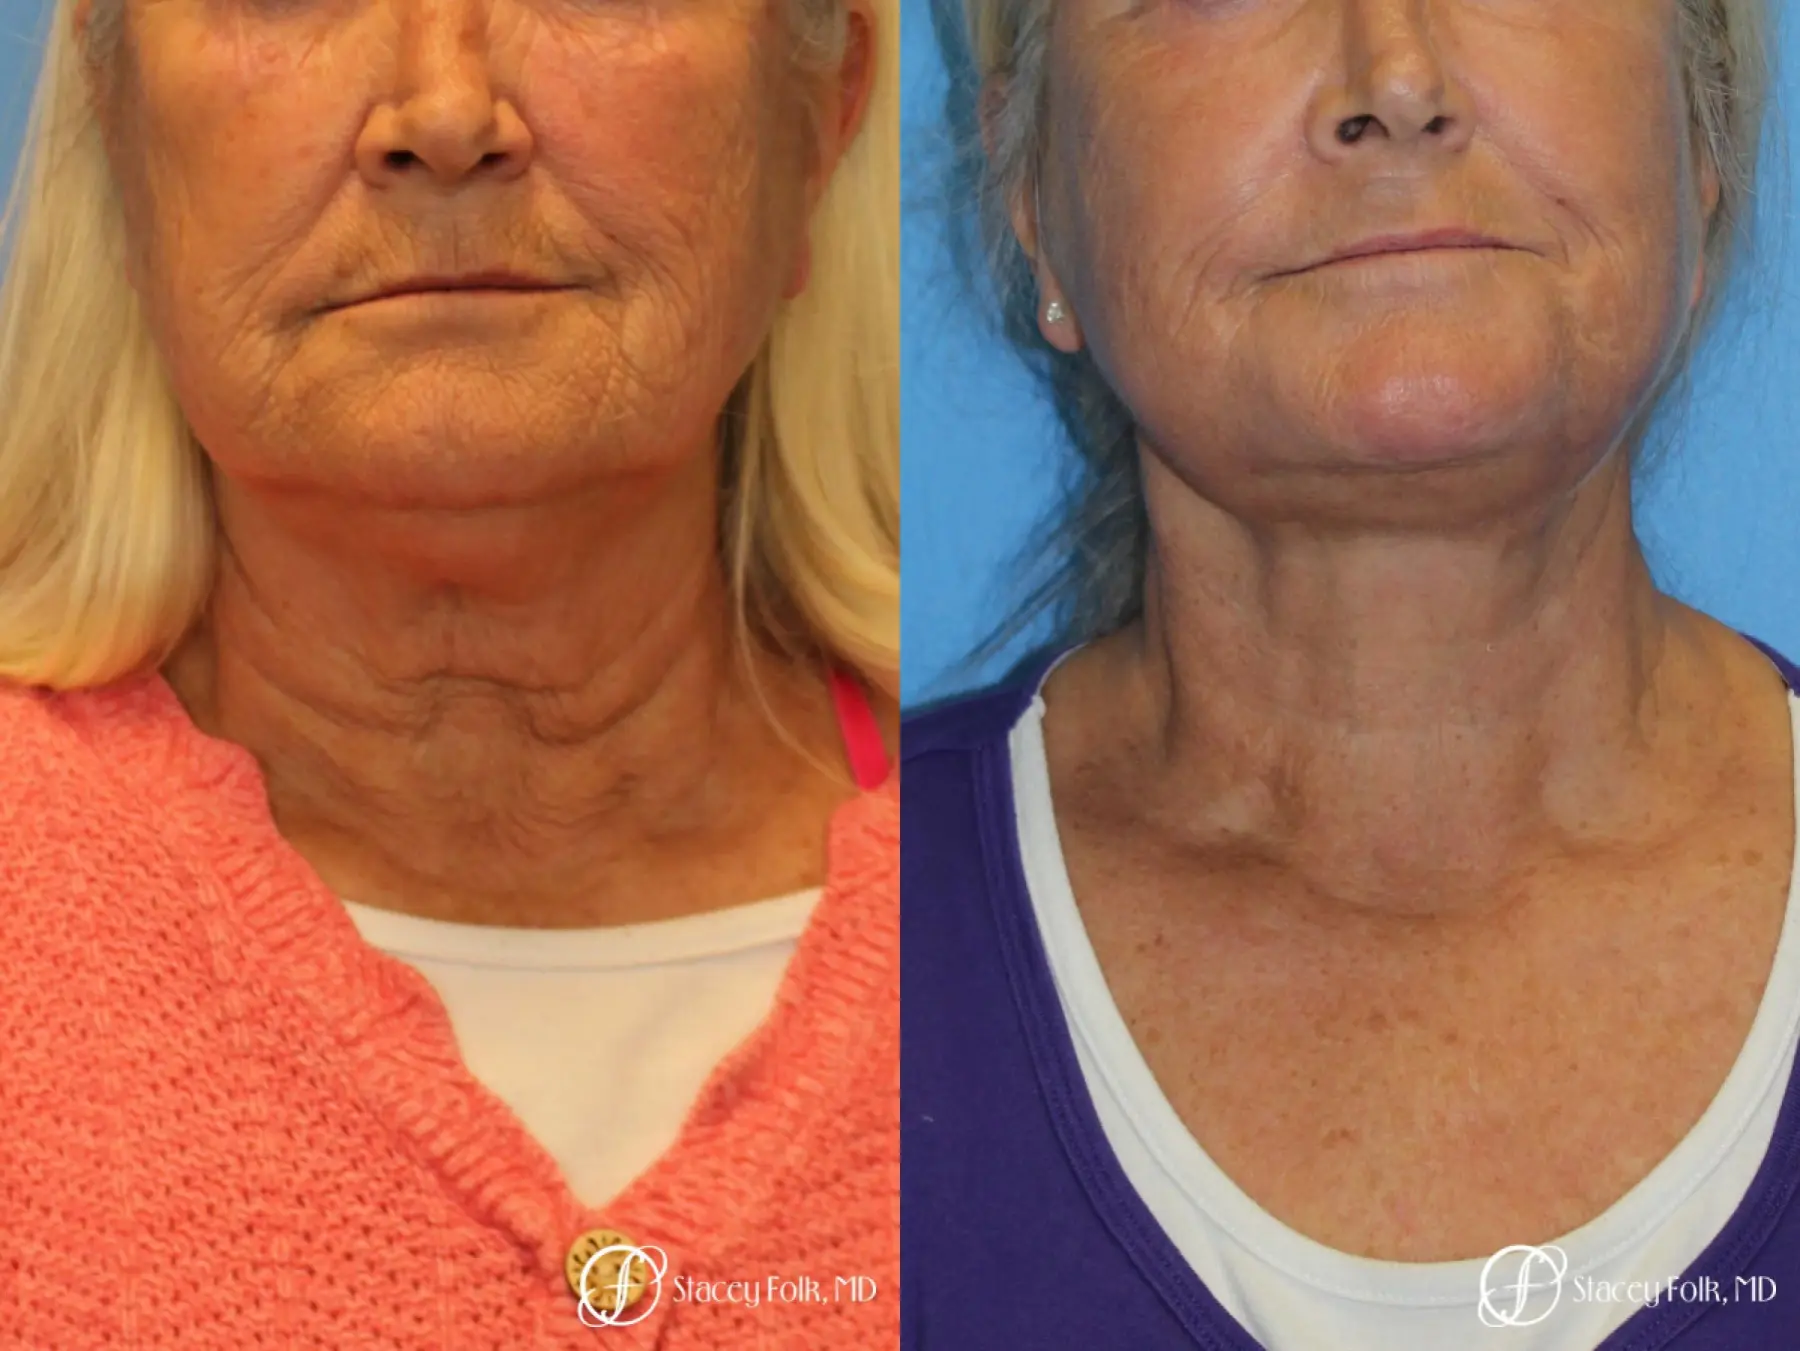 Facelift and Laser - Before and After 2